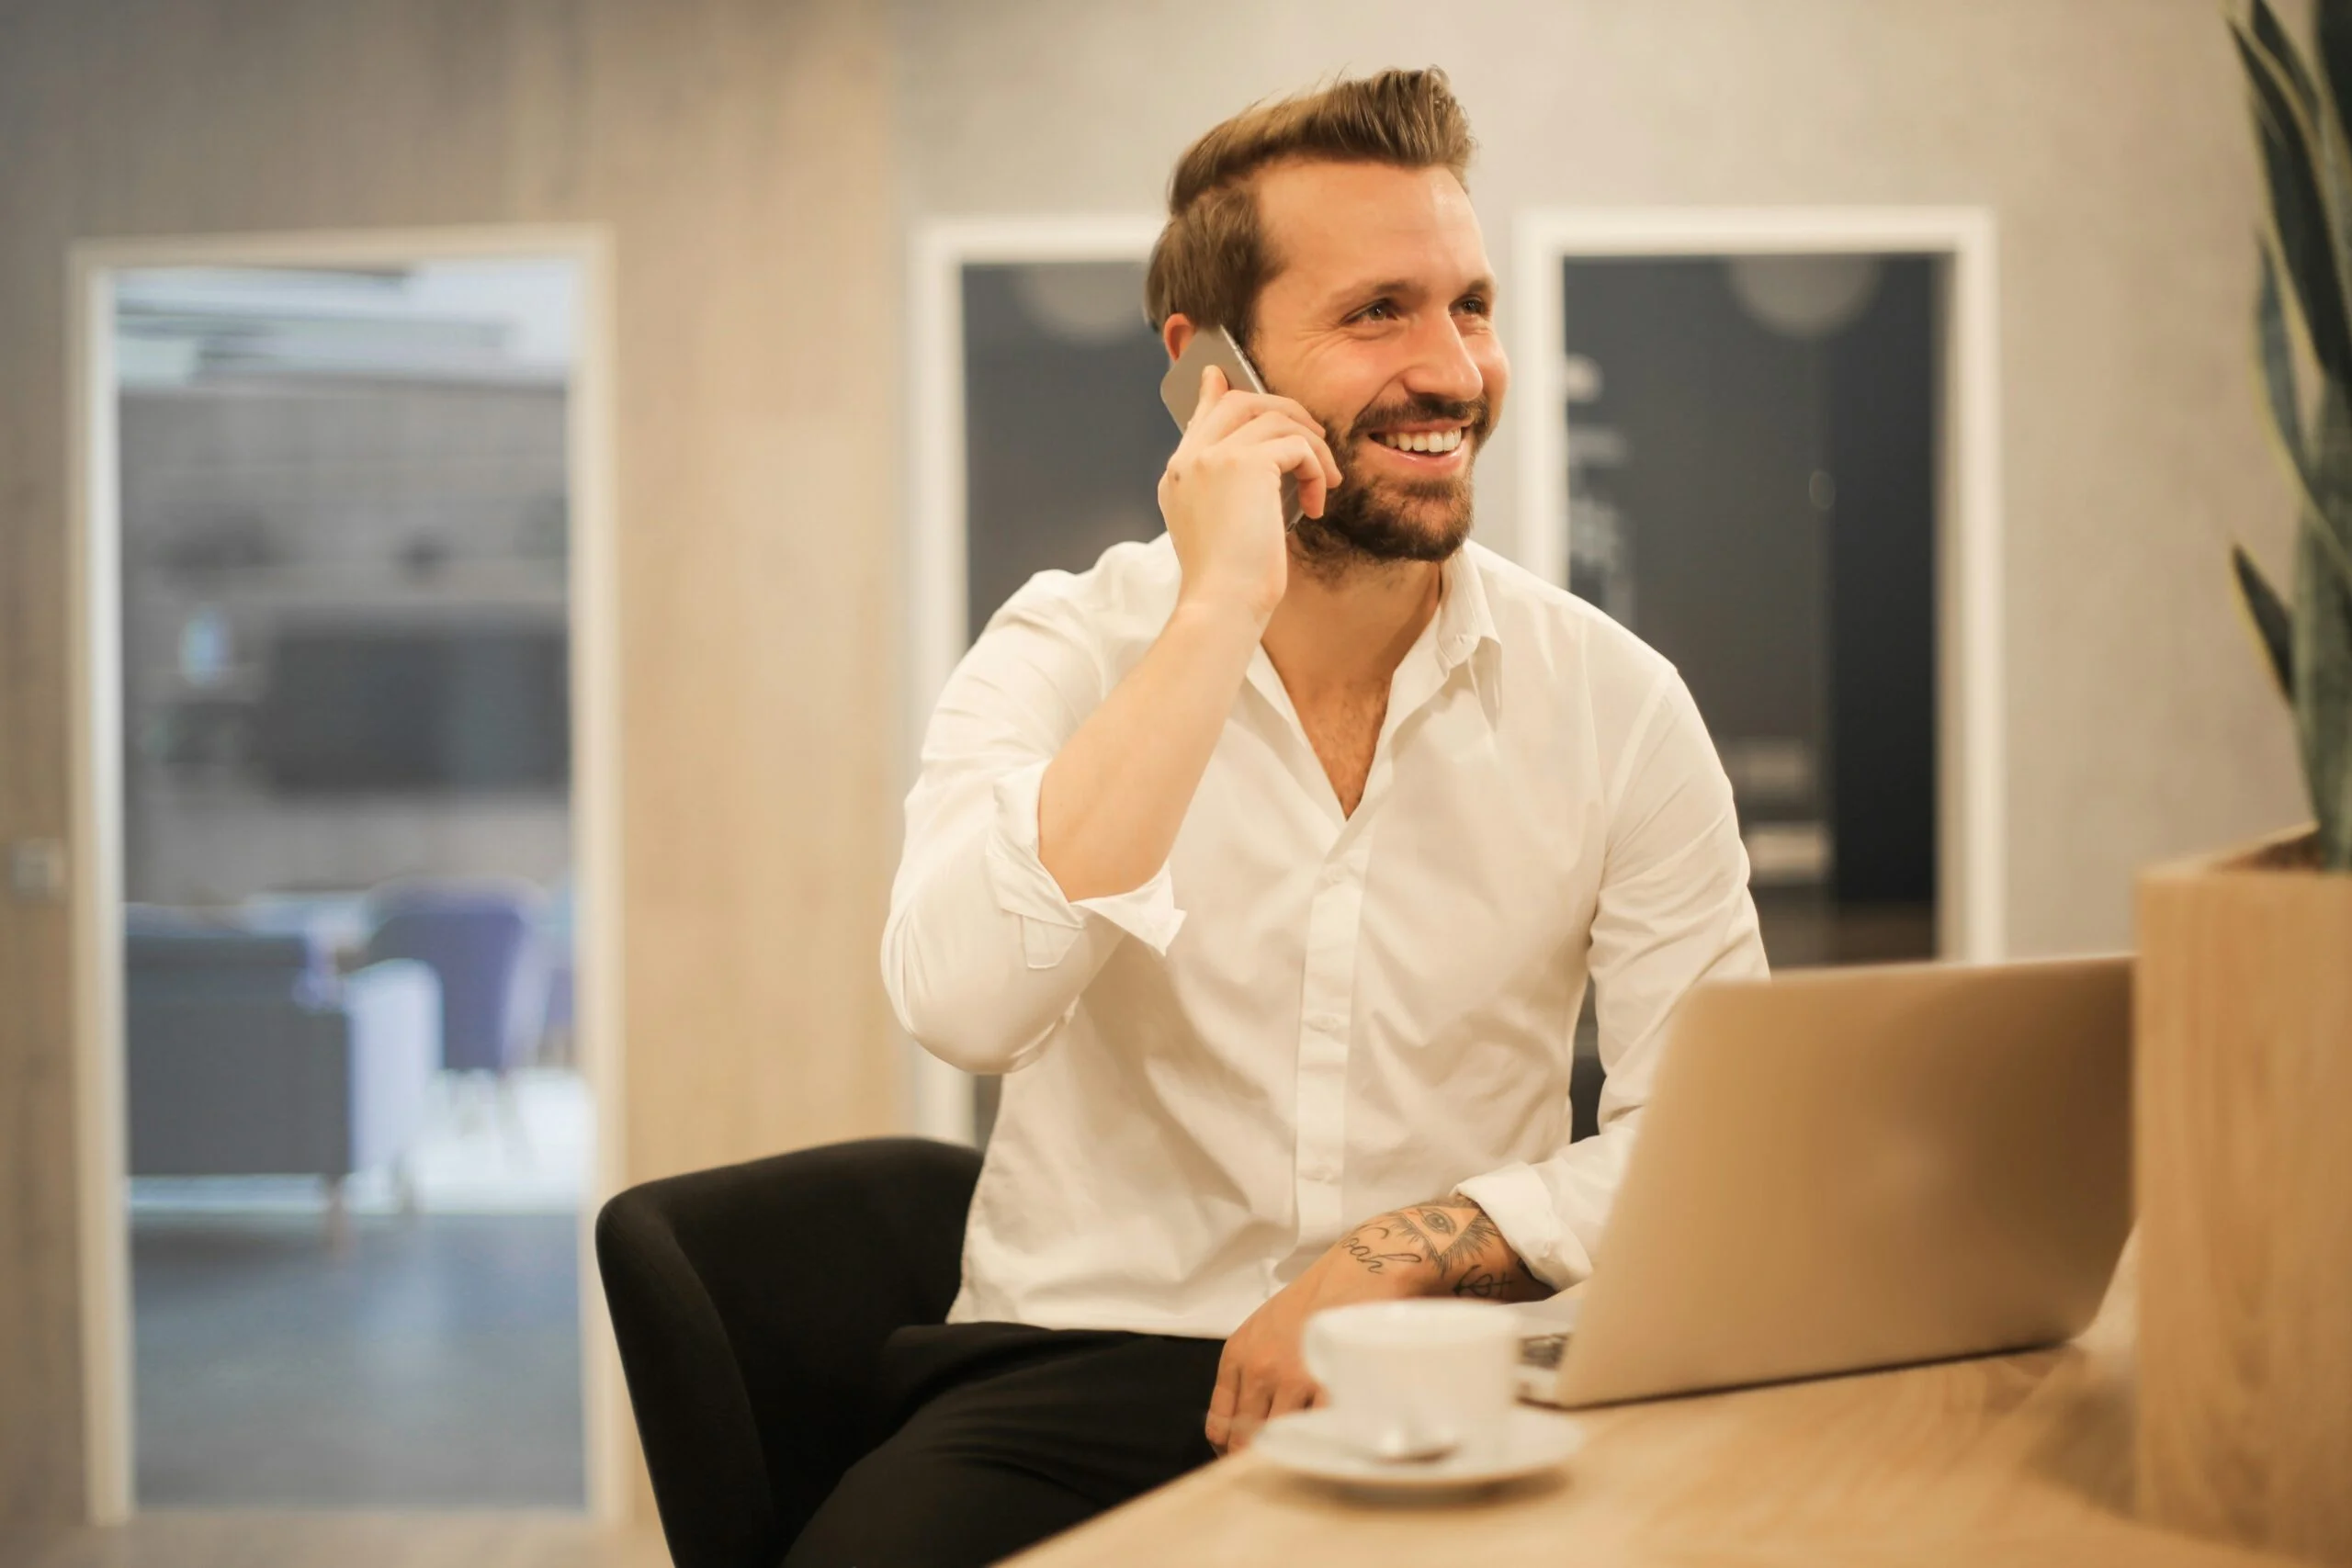 Smiling professional on a phone call, enjoying the benefits of an automated workflow.